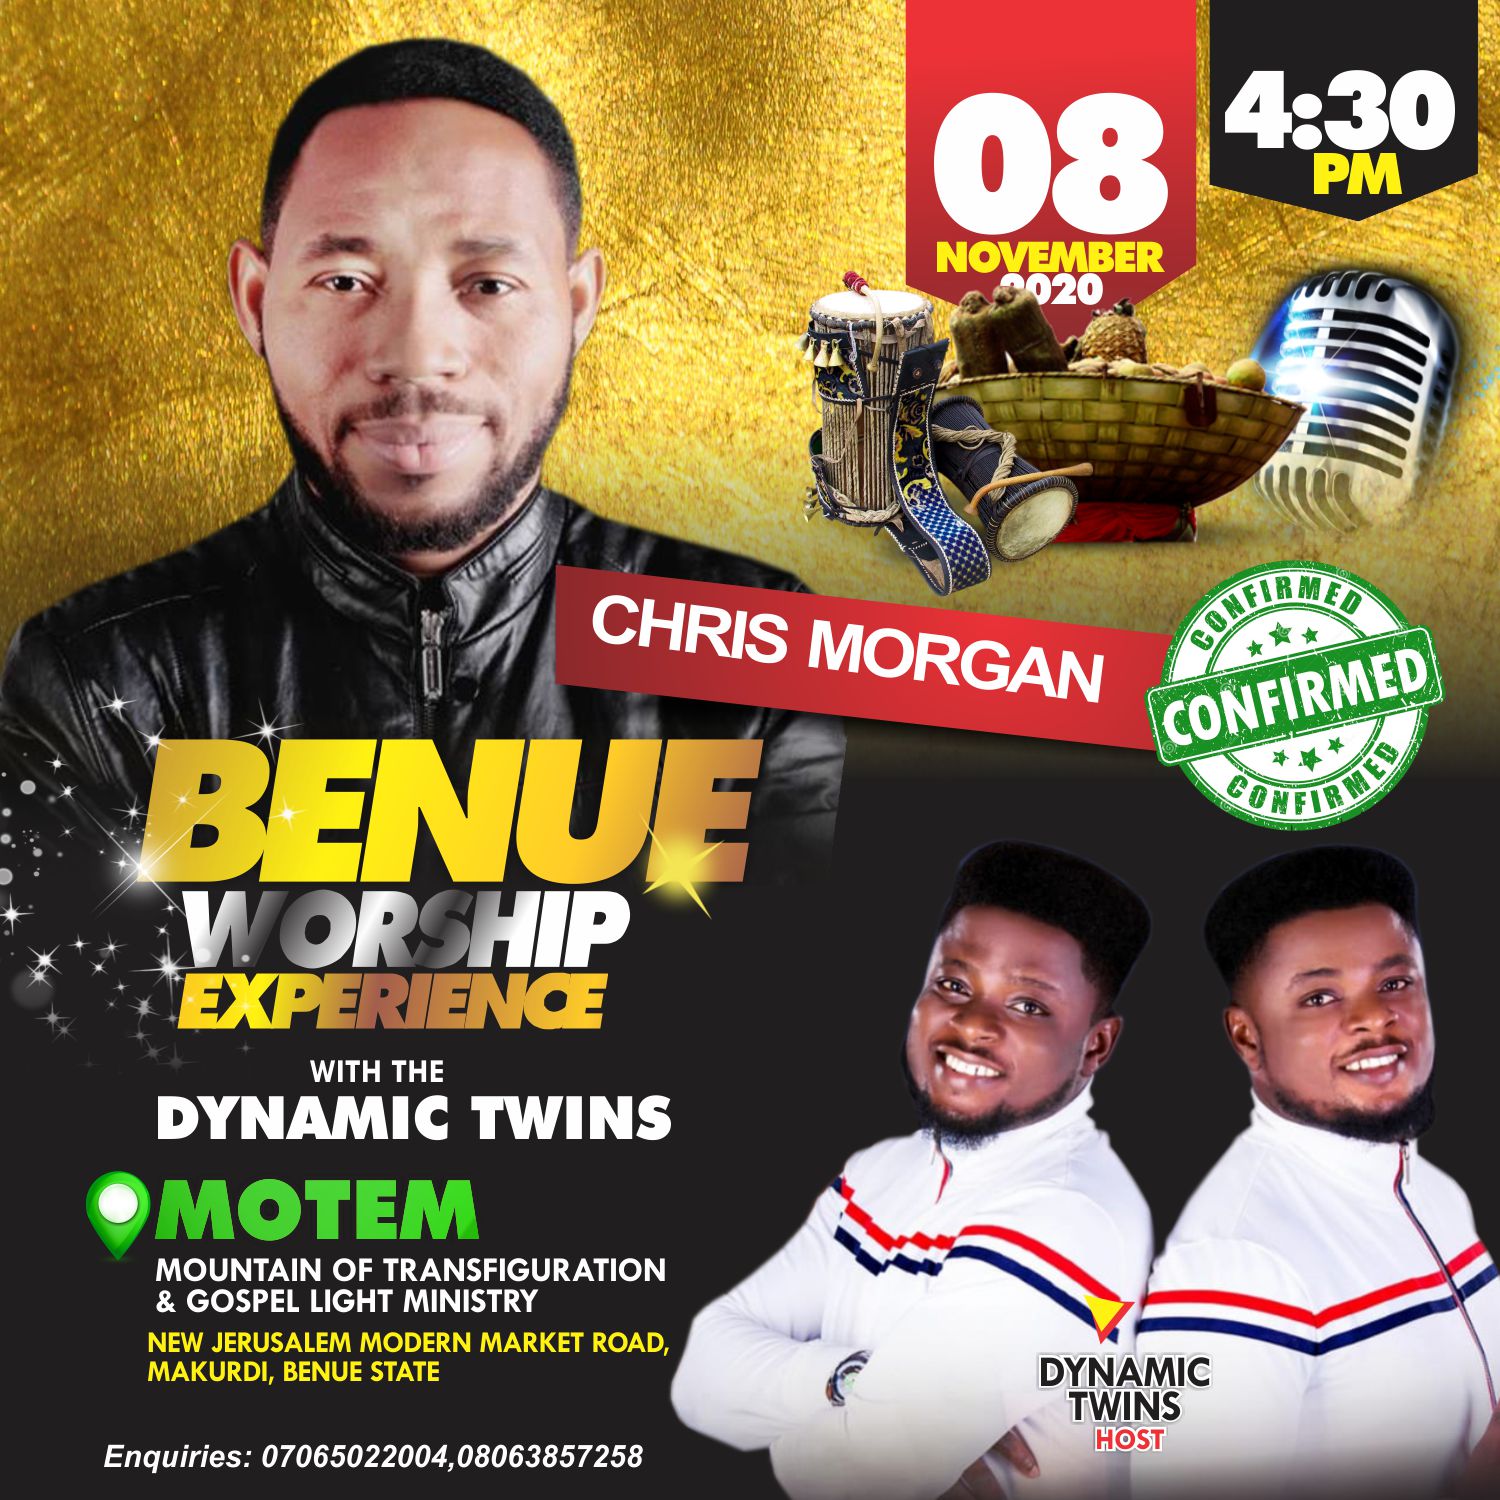 History about to be created with Benue worship experience with Dynamic Twins featuring Chris Morgan, Oche Jon kings, Owie Abutu, Okopi Peterson, Dan Favour and a host of others